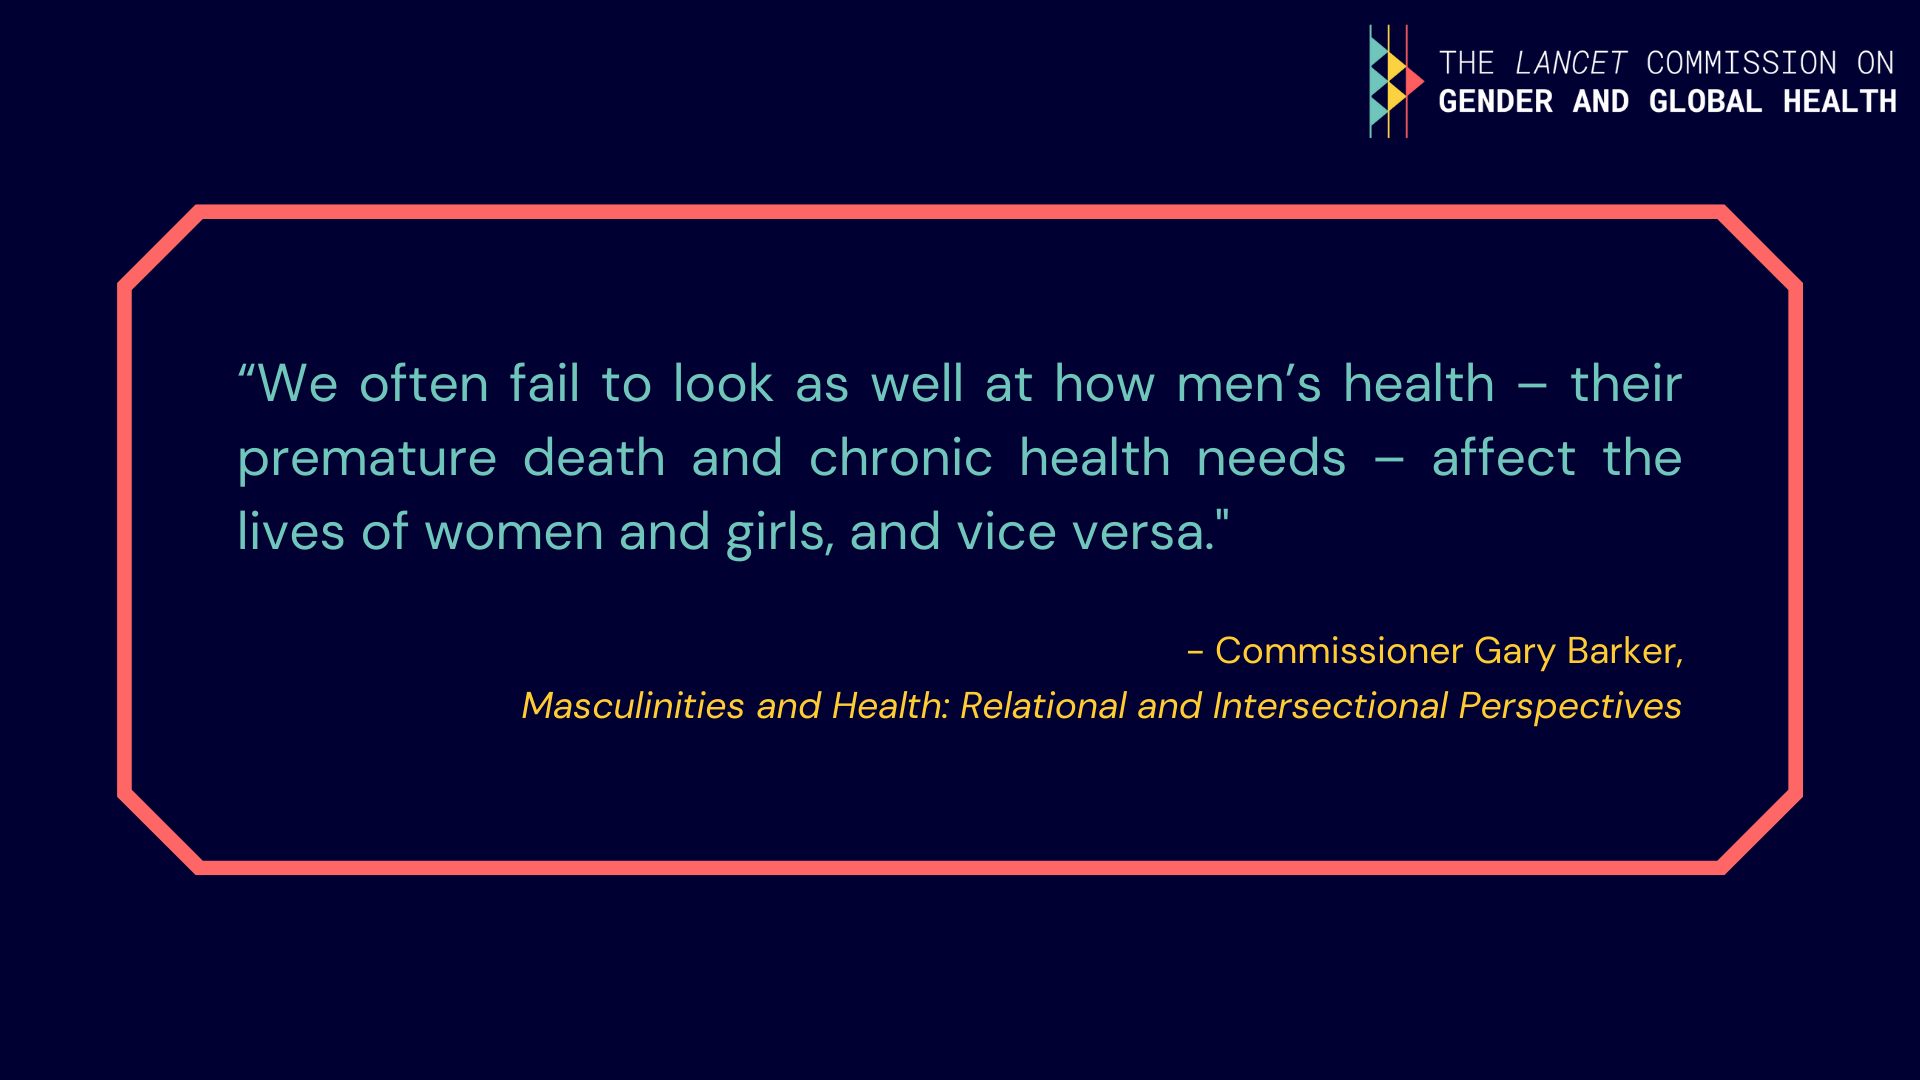 Gary Barker: "We often fail to look as well at how men's health - their premature death and chronic health needs - affect the lives of women and girls, and vice versa".